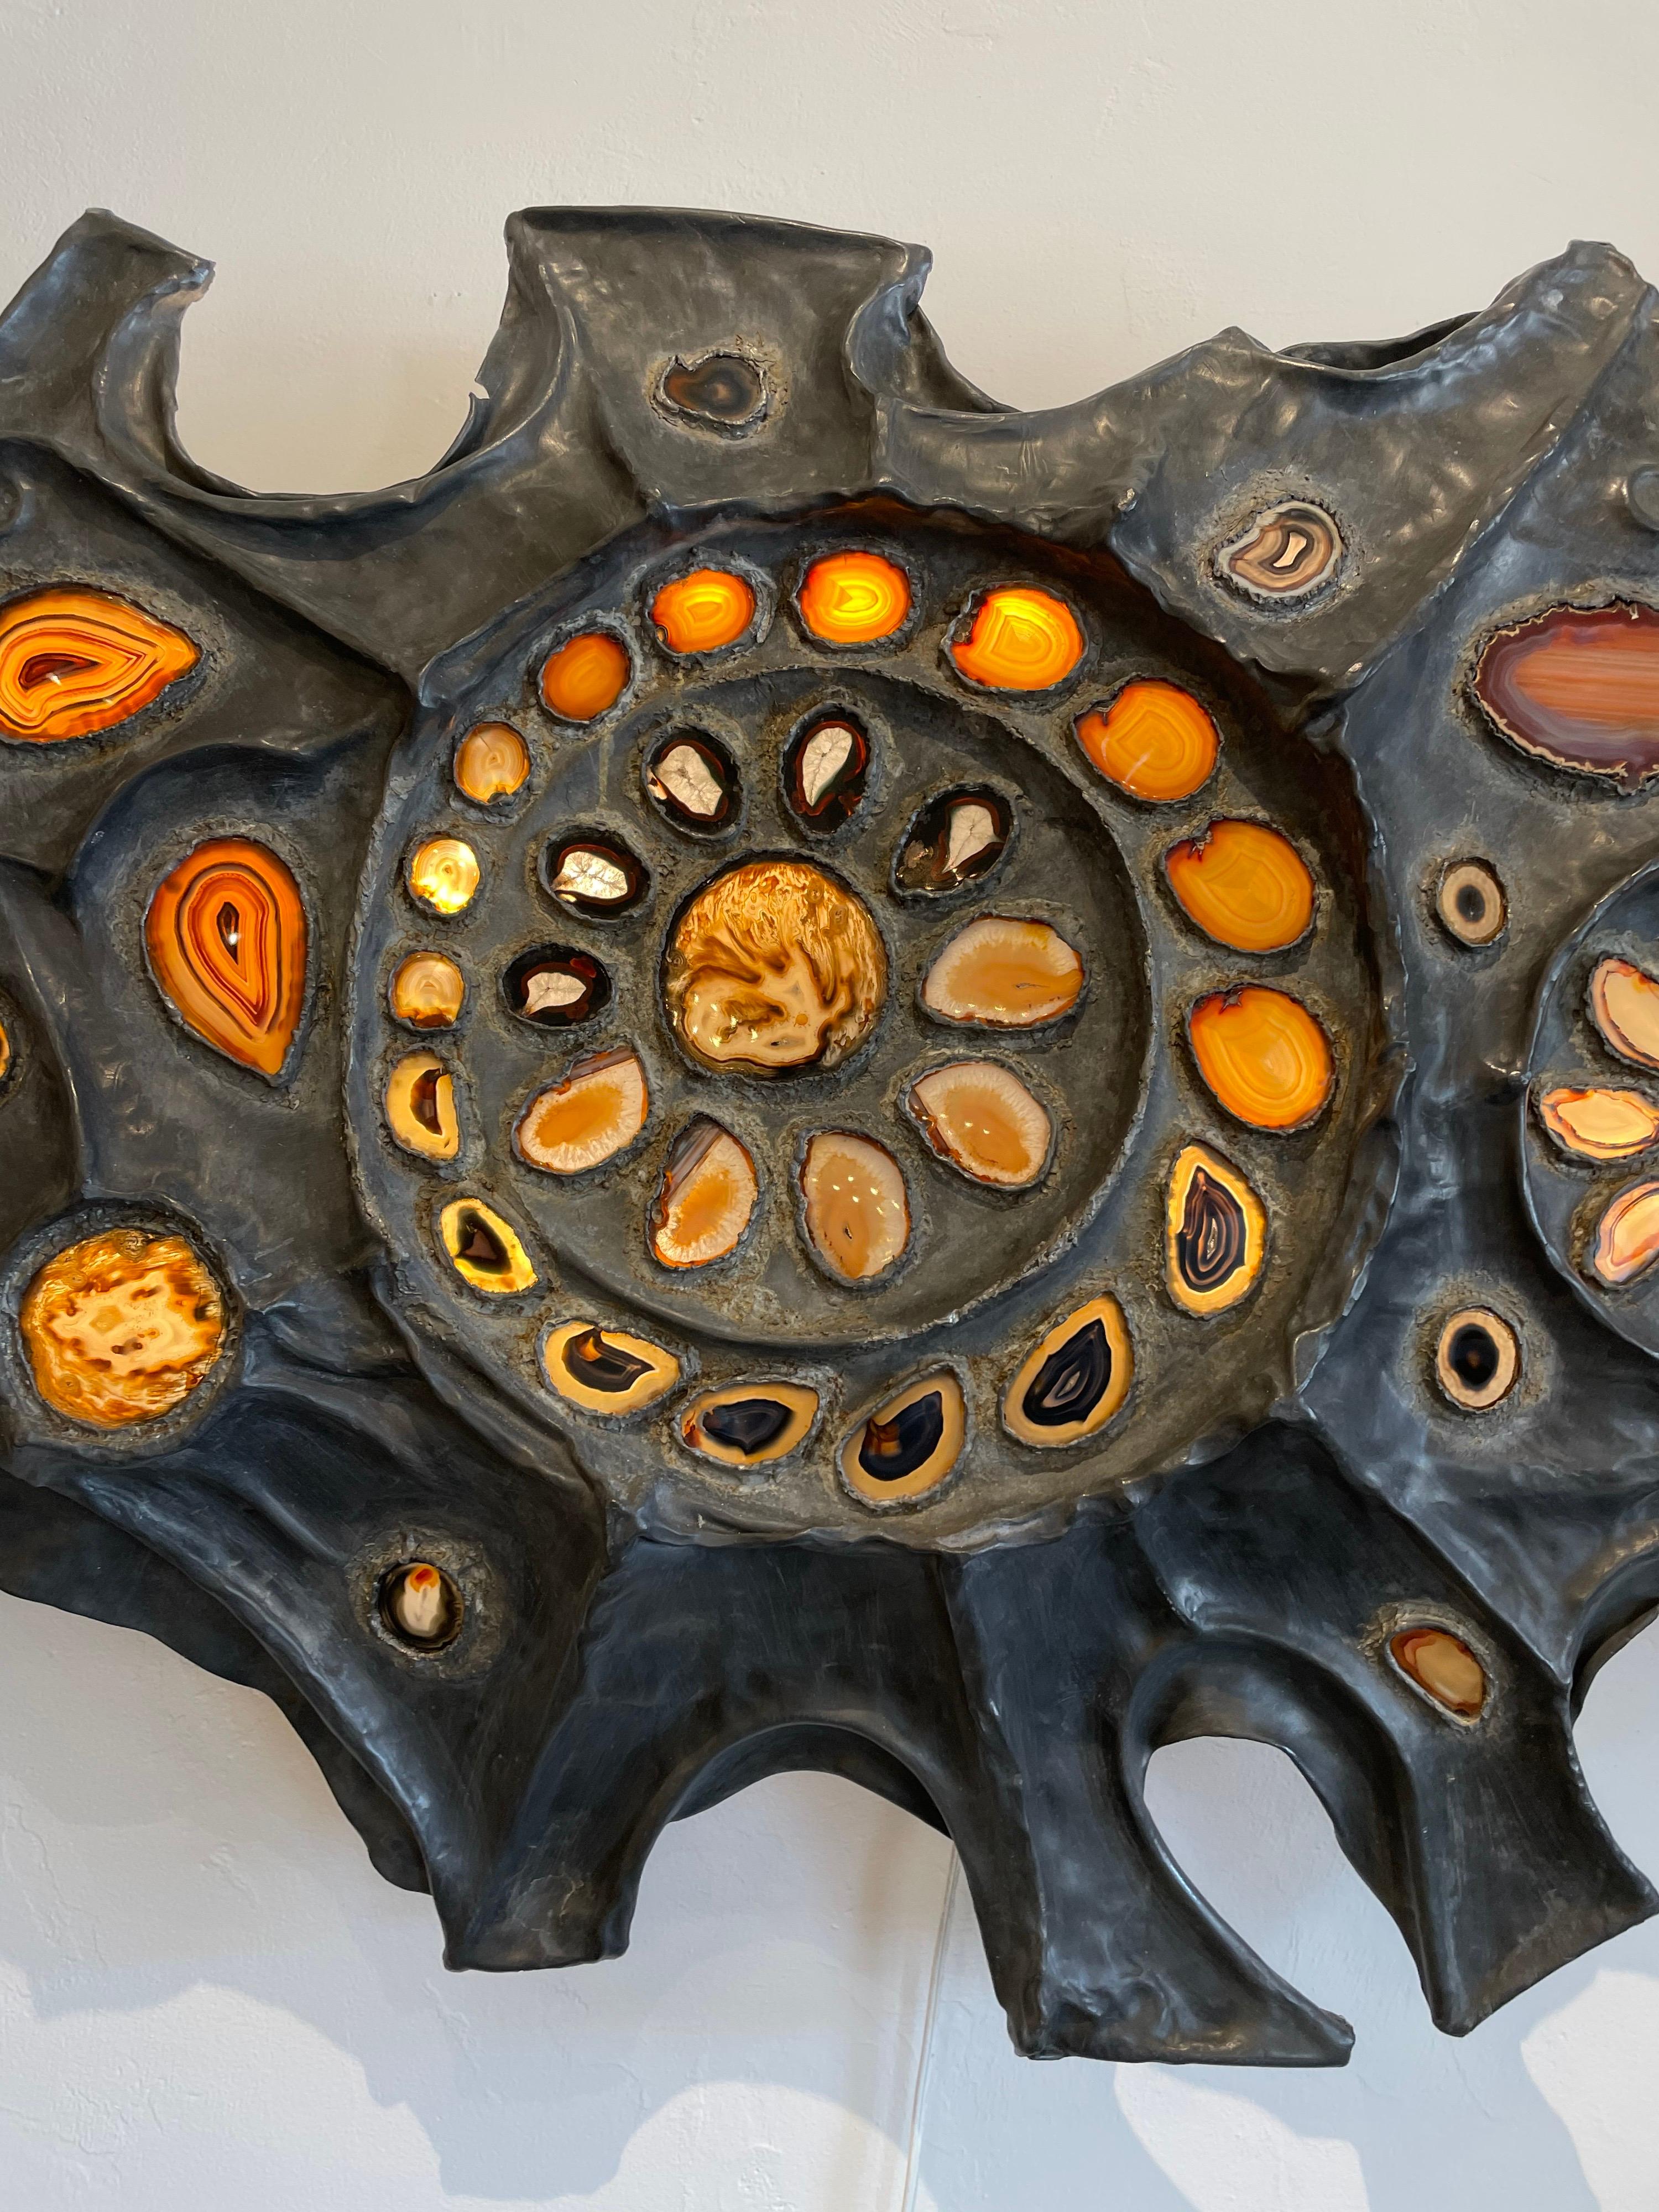 This over the op vintage French lead metal and agate slices which are beautifully illuminated from behind in an organic free form style wall sculpture. Natural colorings to agate - see all pics.